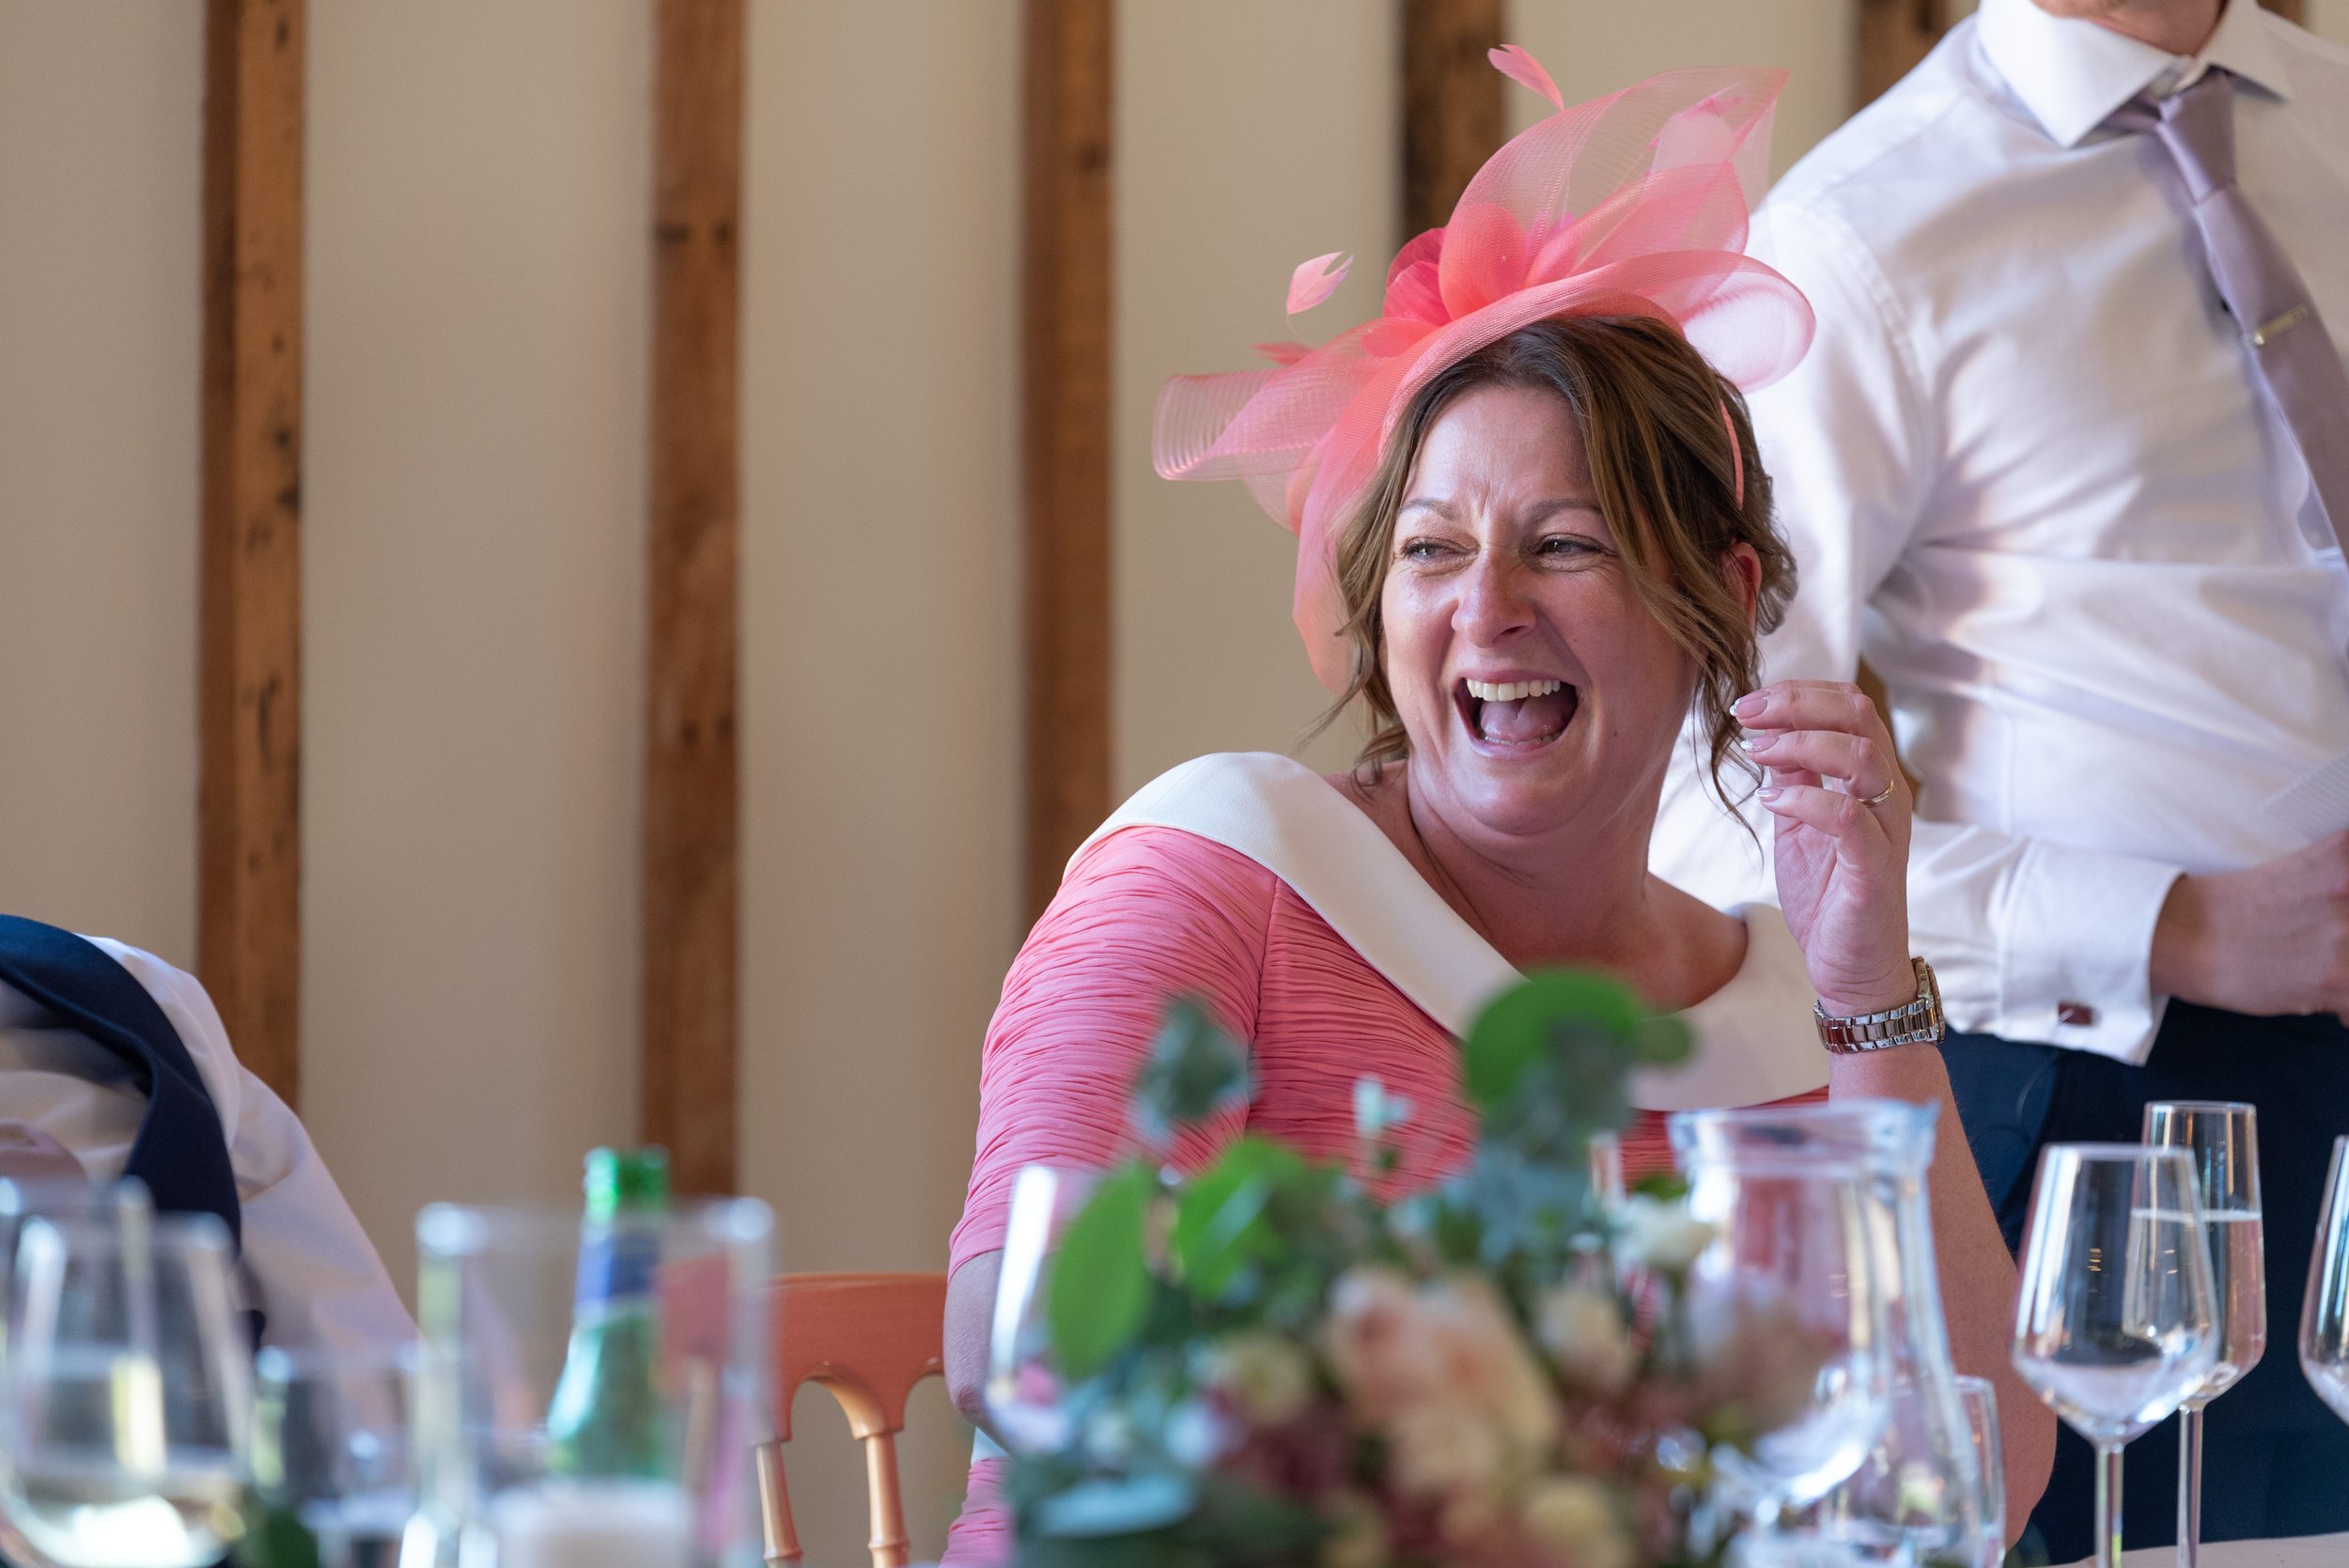  lady laughing at wedding speeches 